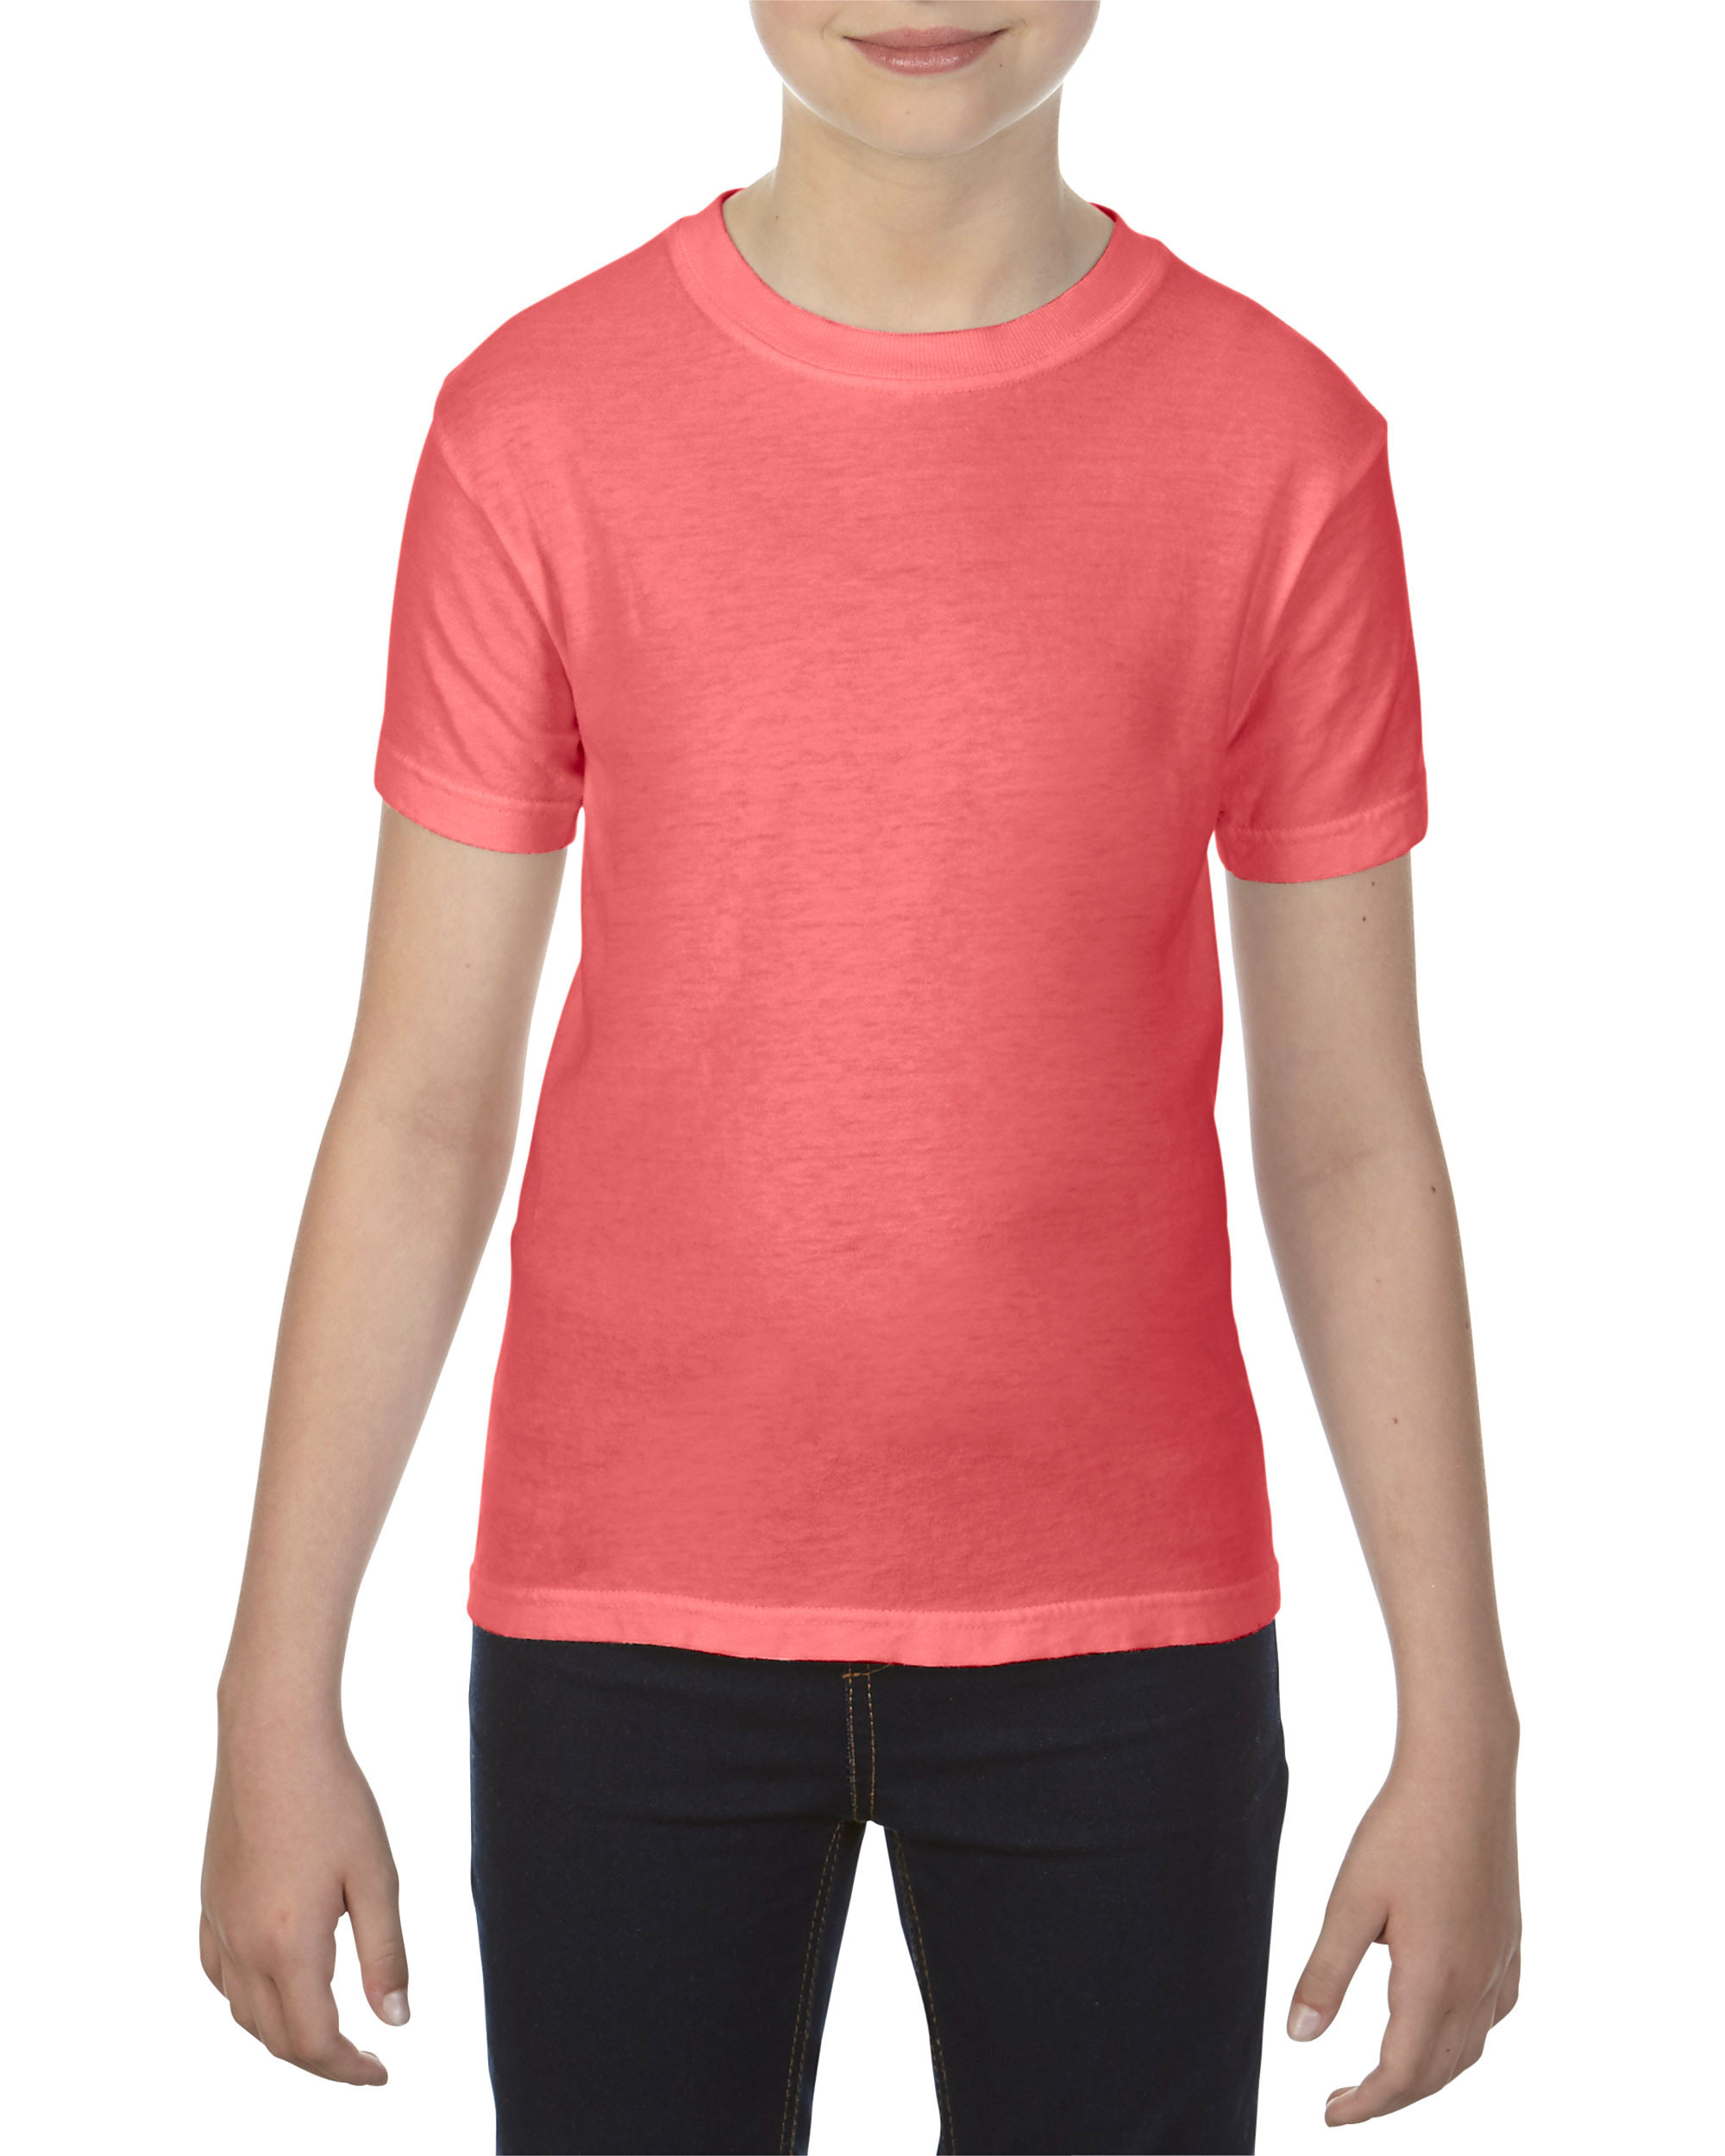 Comfort Colors® 9018 Youth Heavyweight Tee